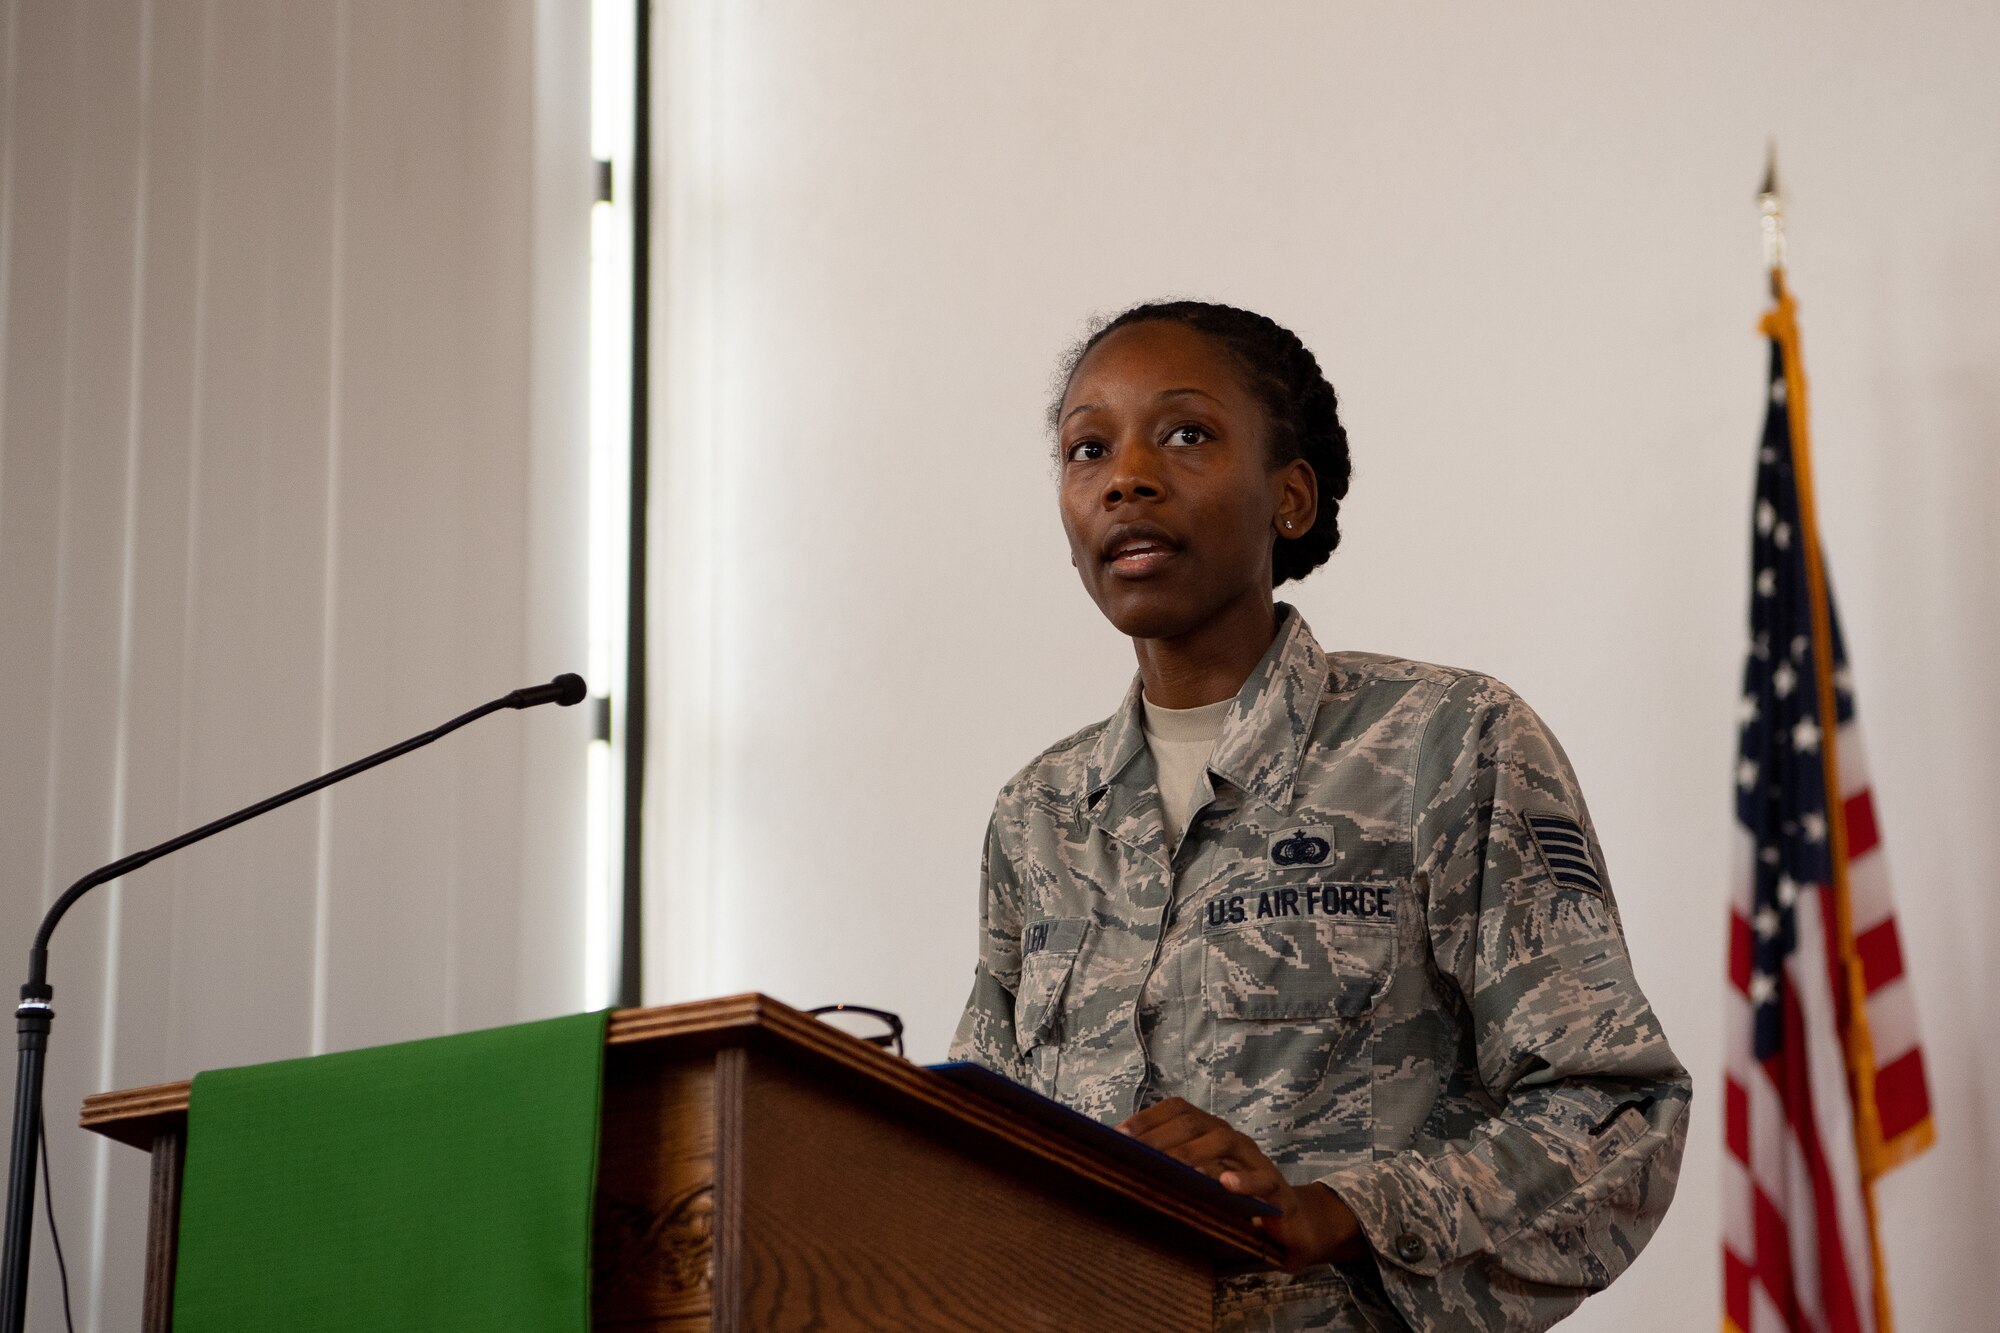 U.S. Air Force Tech Sgt. Marquita Allen, U.S. Air Forces in Europe and Air Forces Africa commander enlisted executive, gives a speech at the Juneteenth: Vigil for Healing event at Ramstein Air Base, Germany, June 19, 2020.